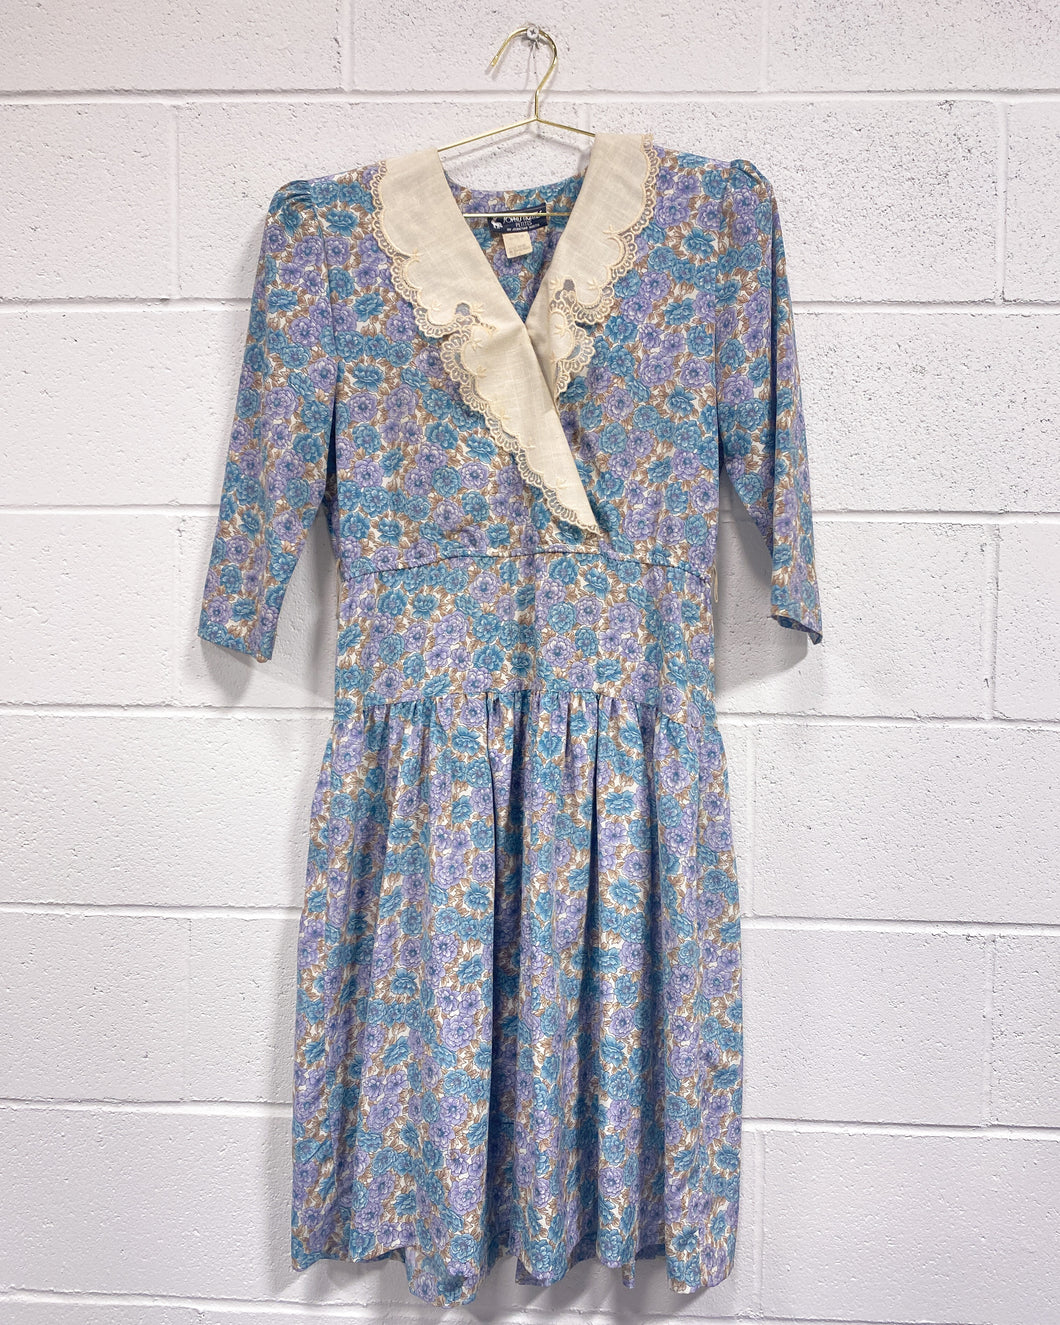 Vintage Floral Dress with Lacey Collar (6)